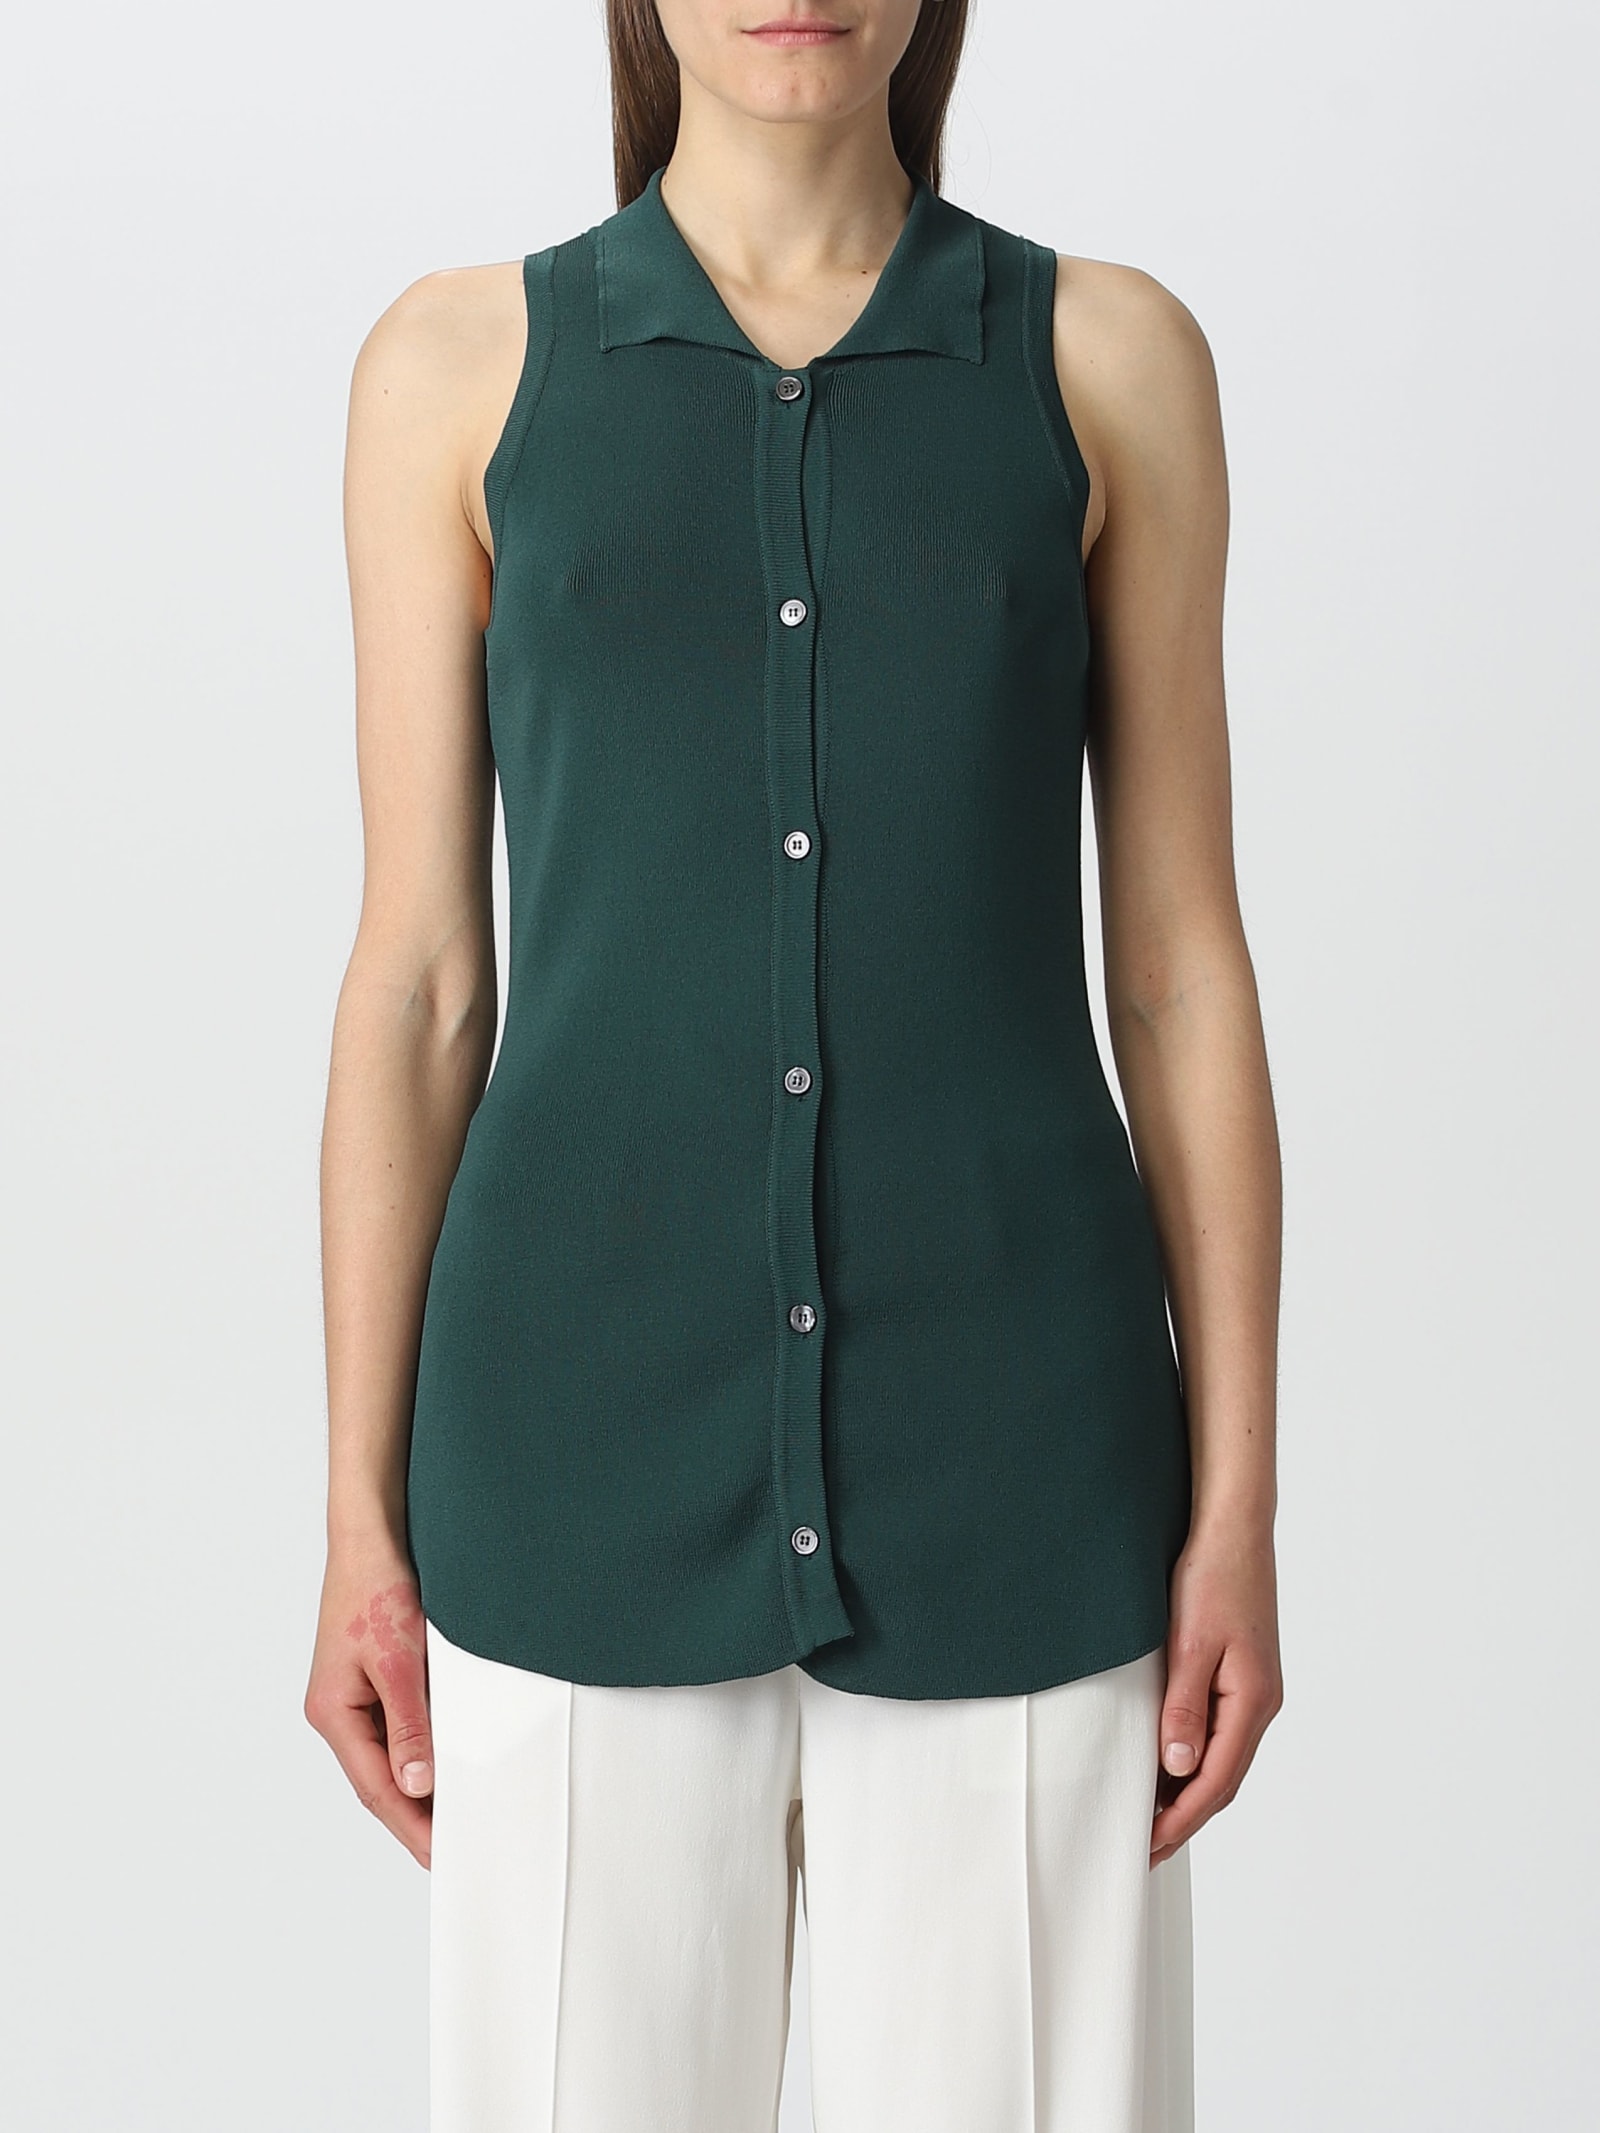 Mauro Grifoni Polo Shirt Sm In Green